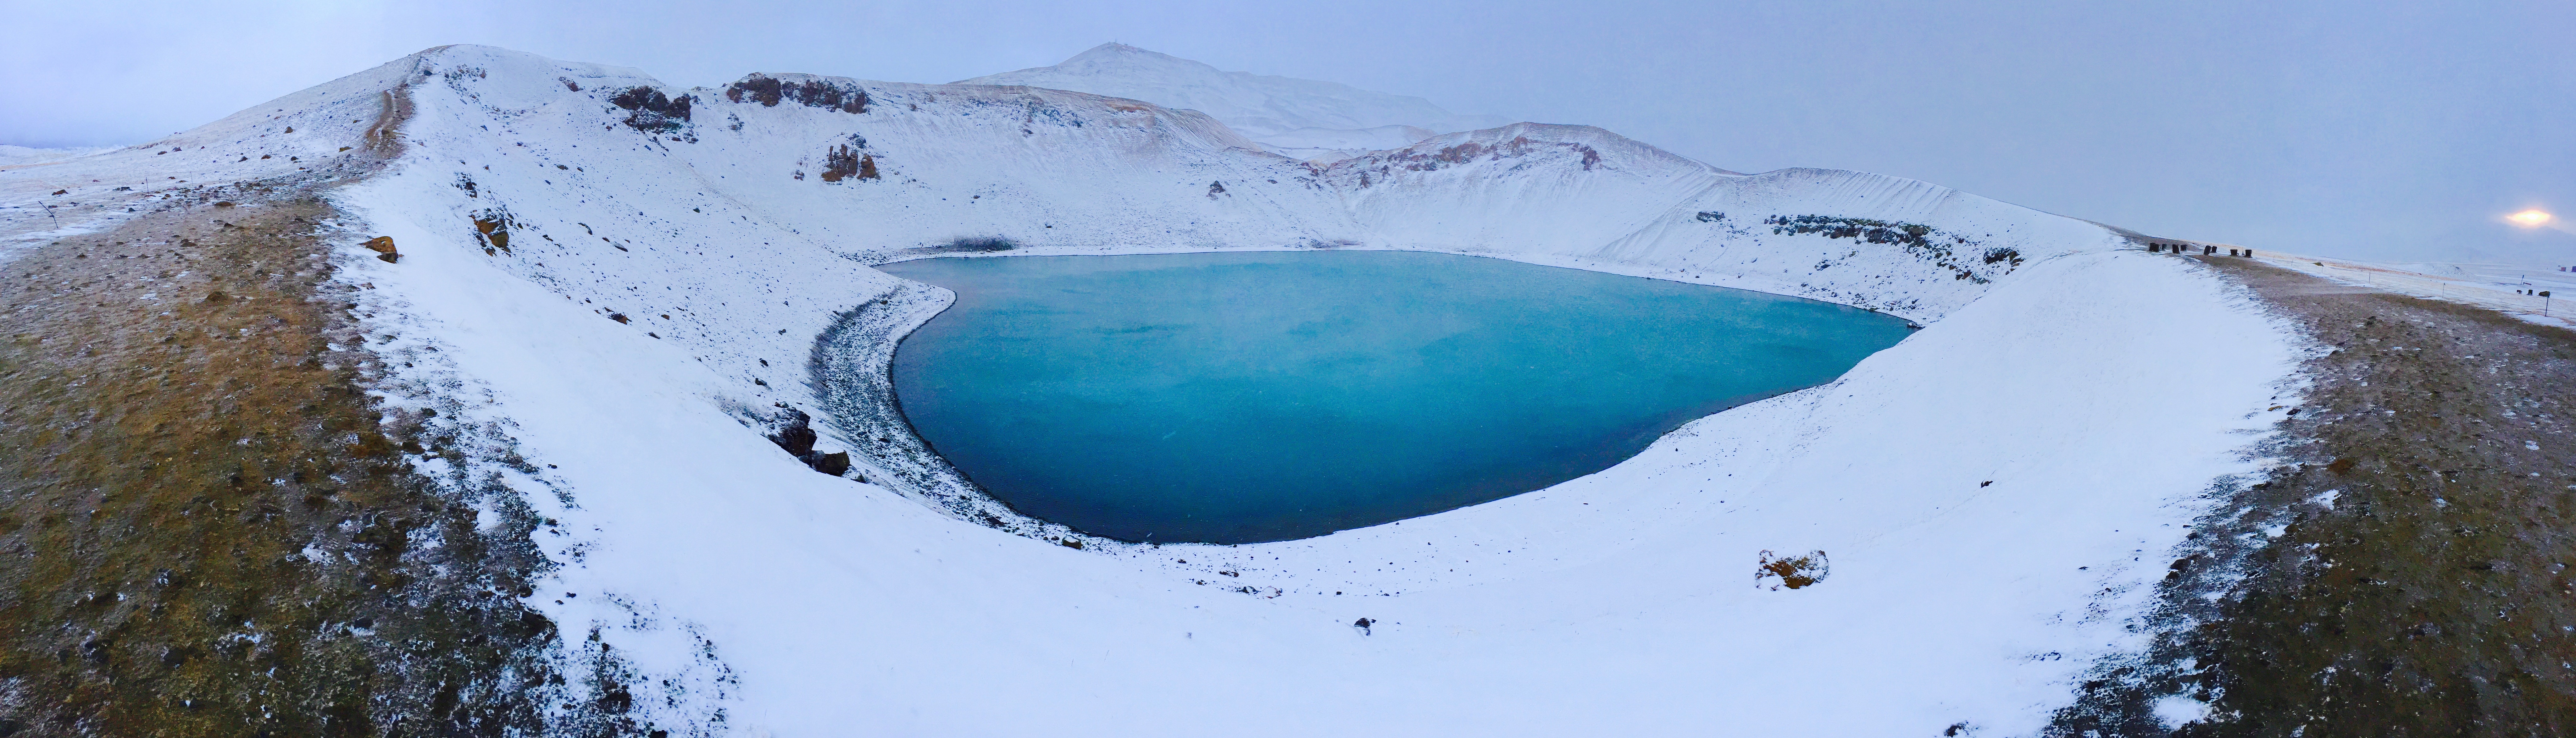 Blue lake in the middle of snowfield photo